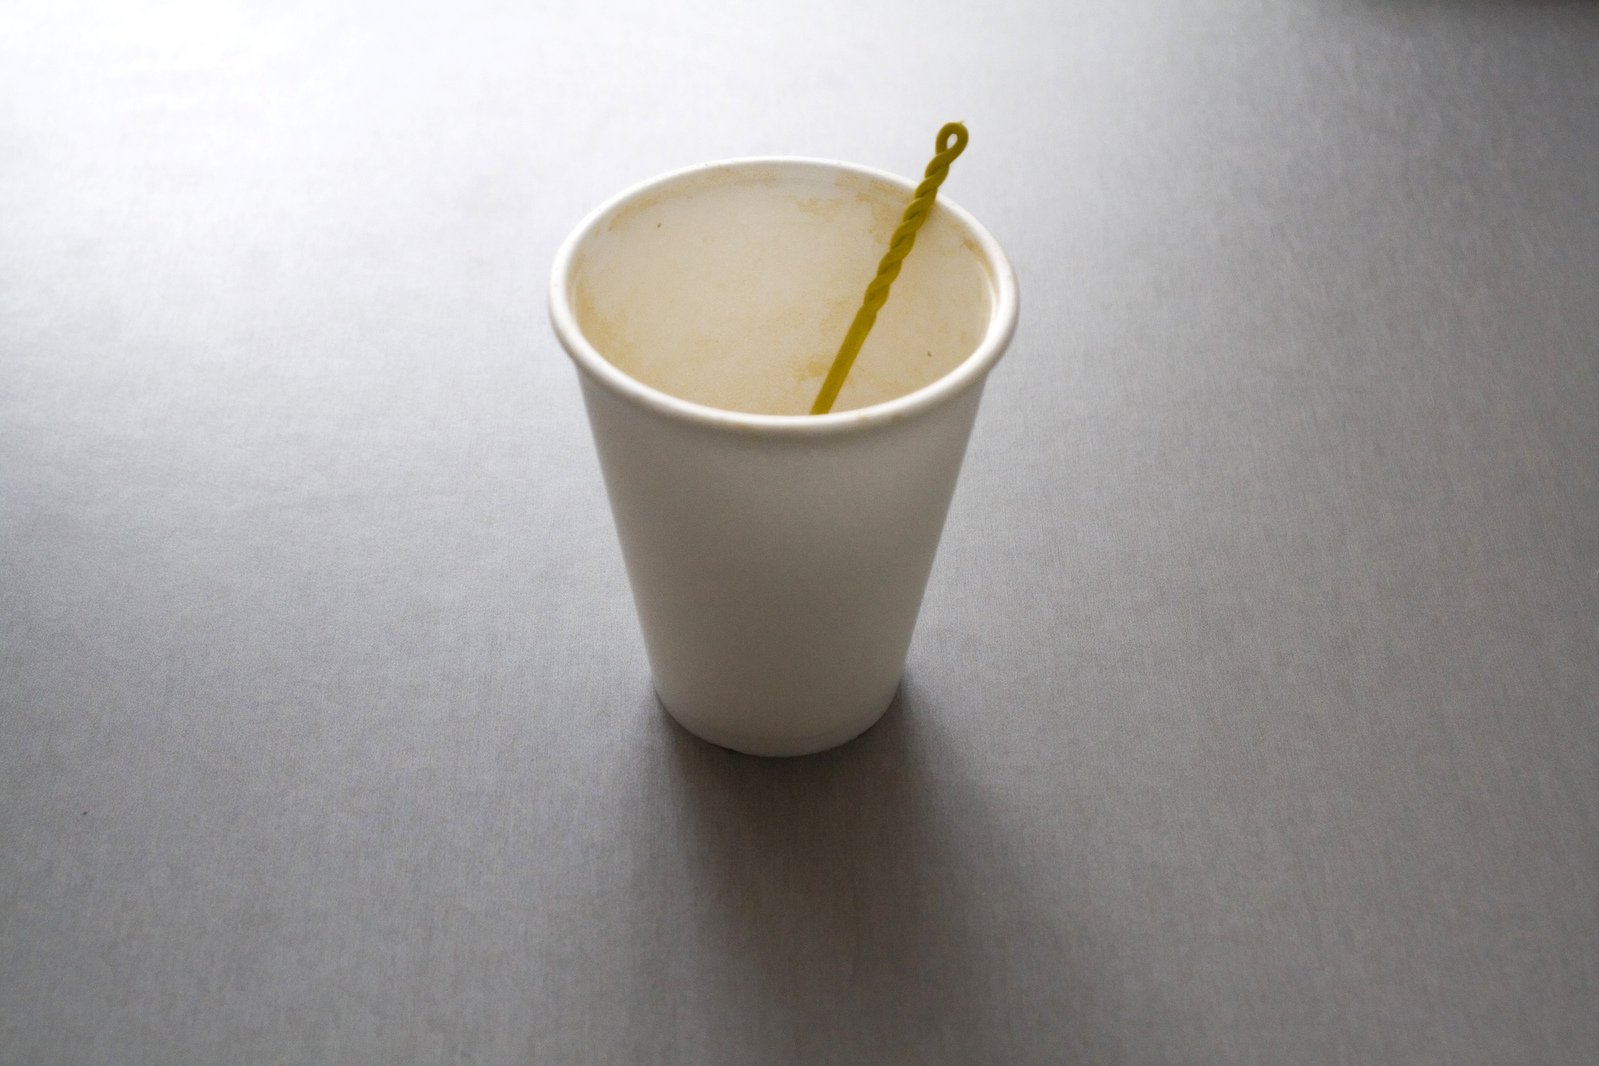 a cup with a straw in it sits on the table